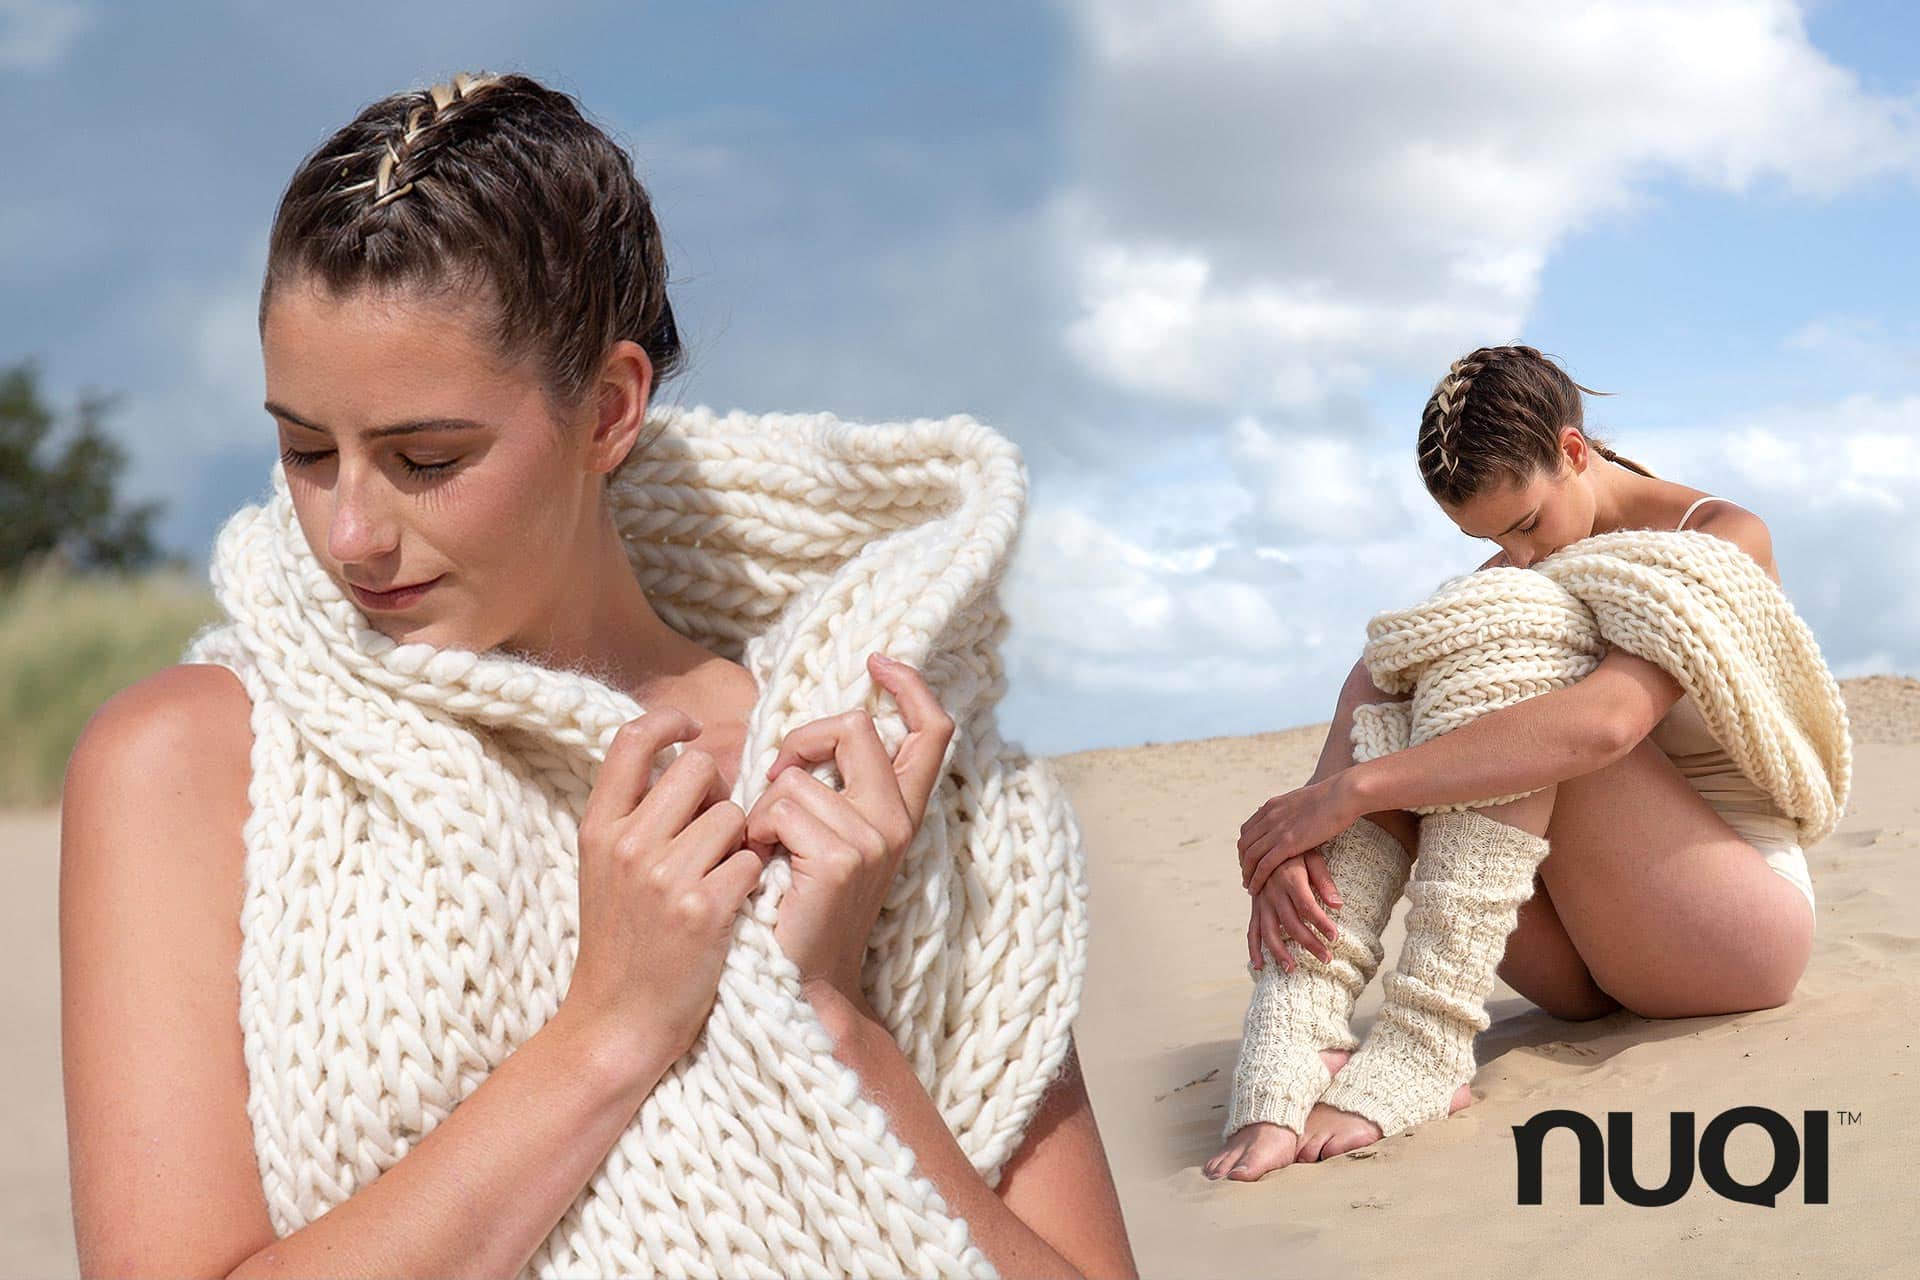 NUQI Pure Sustainable Fashion Sustainable fashionable clothing that is made with care for the planet, people and animals